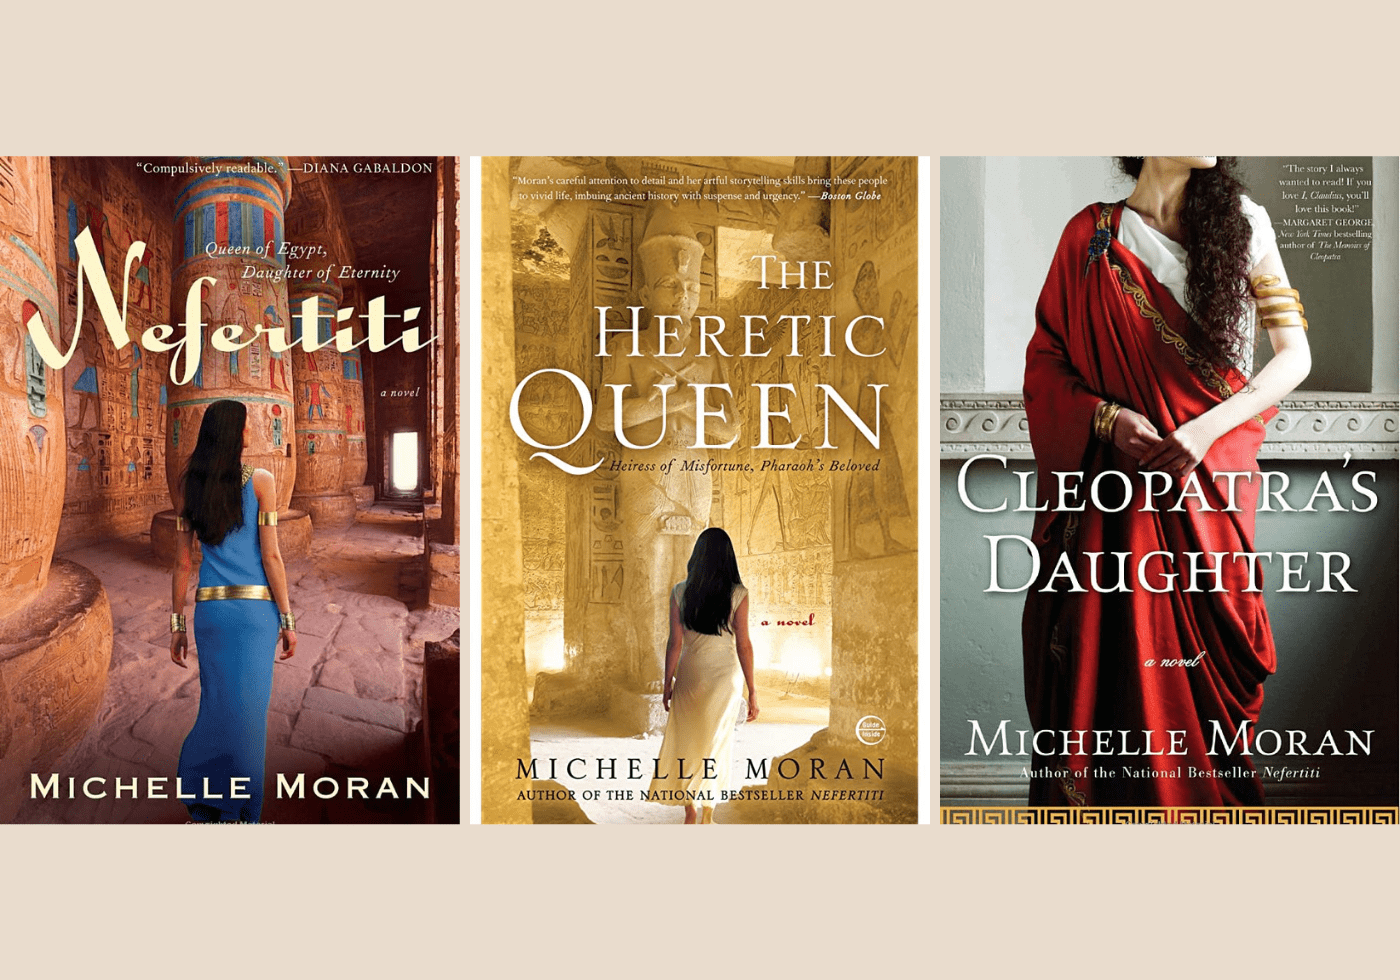 The Egyptian Royals Collection by Michelle Moran